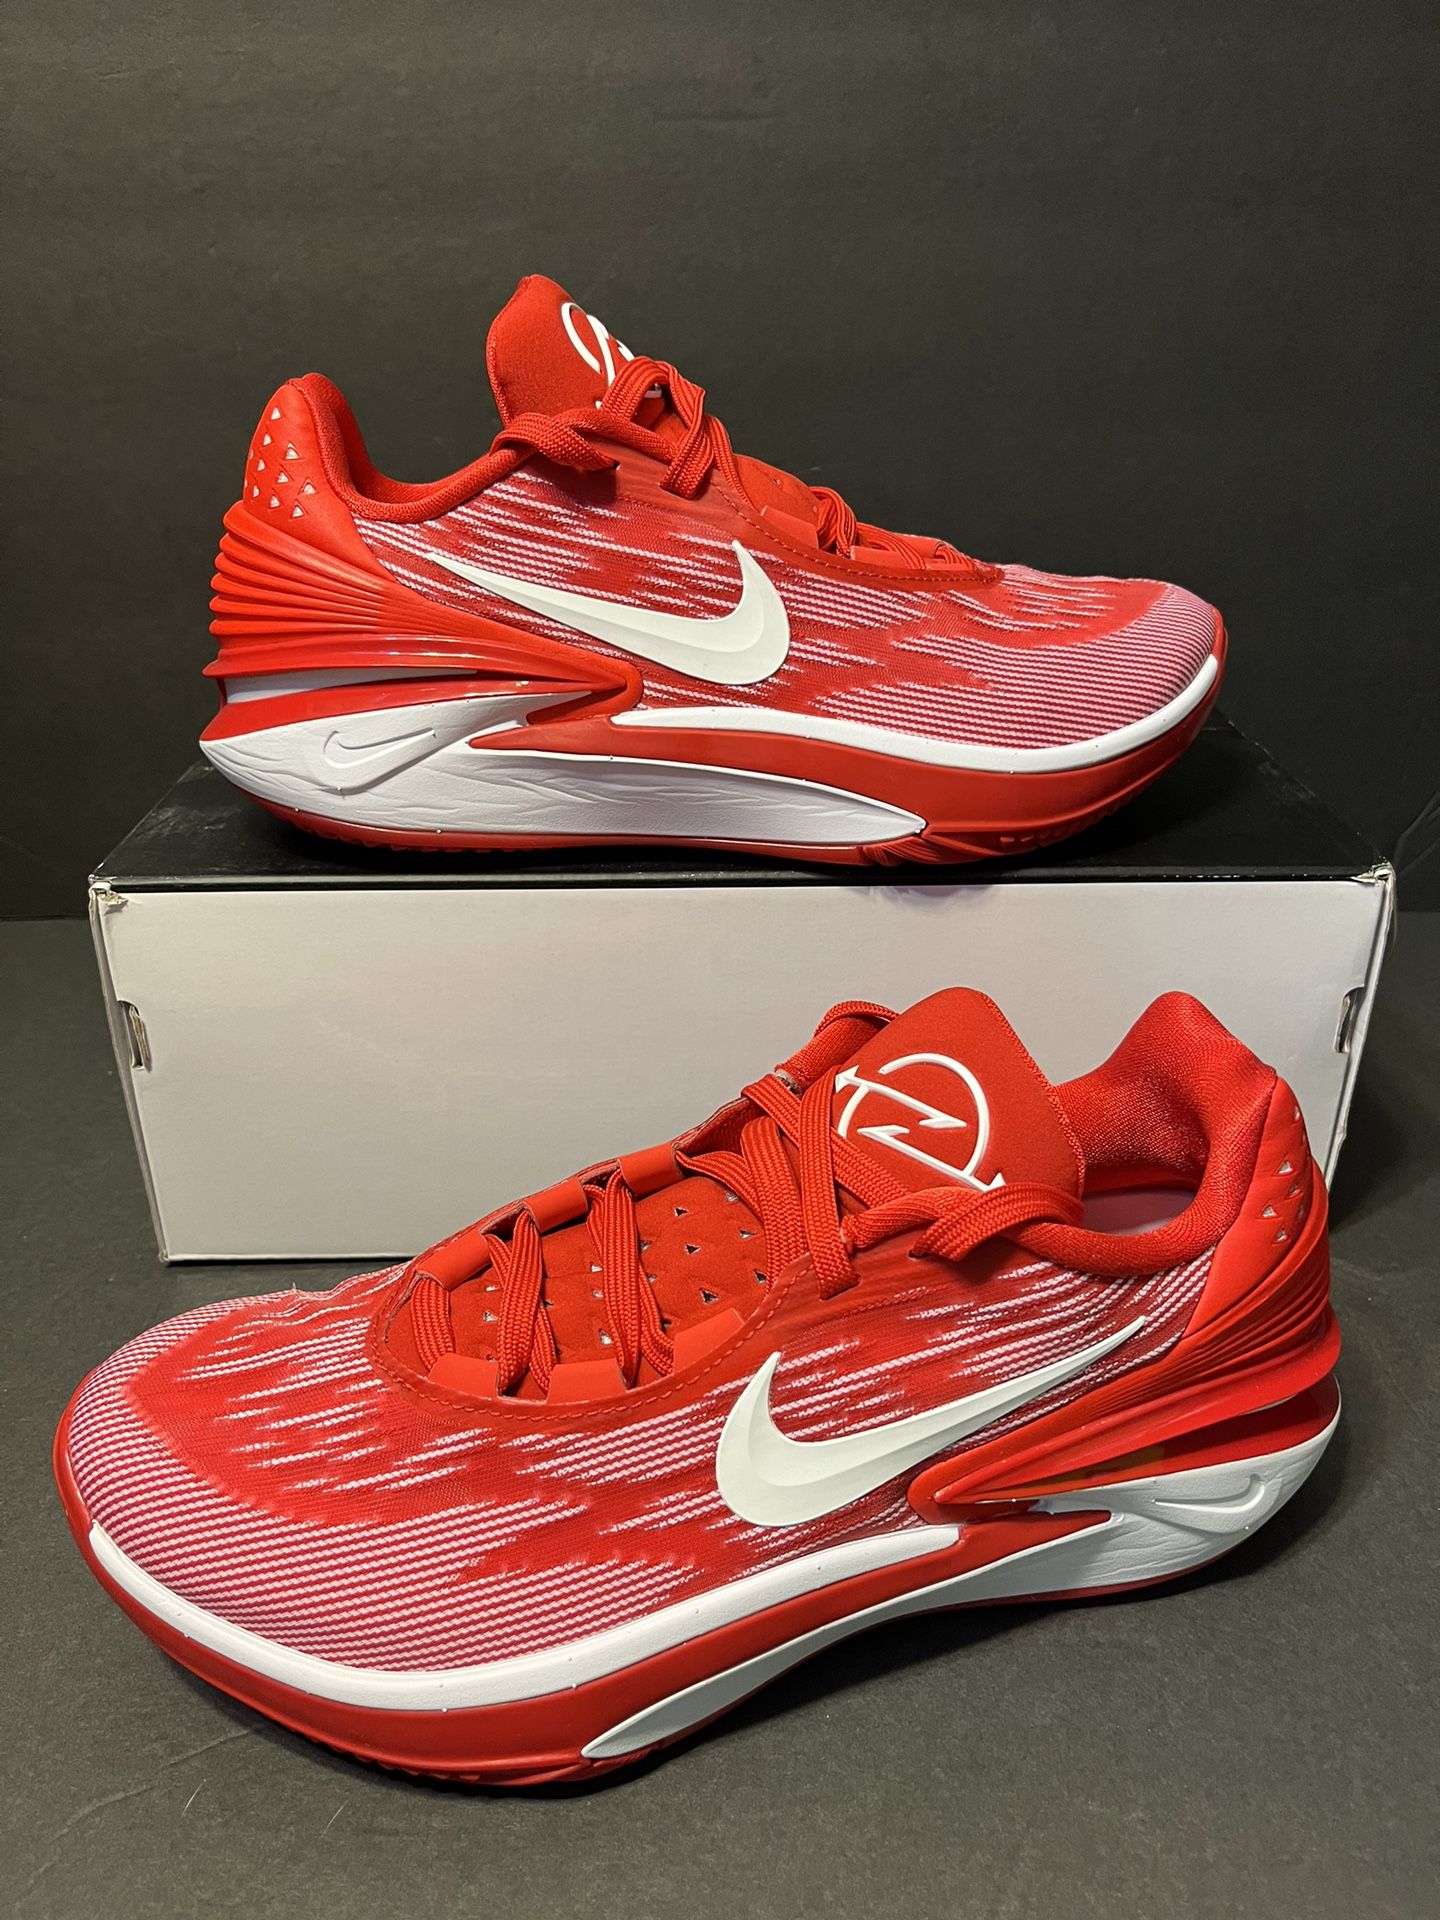 Nike Air Zoom G.T. Cut 2 TB University Red White Size 8.5 Men’s Or 10 Women’s Shoes